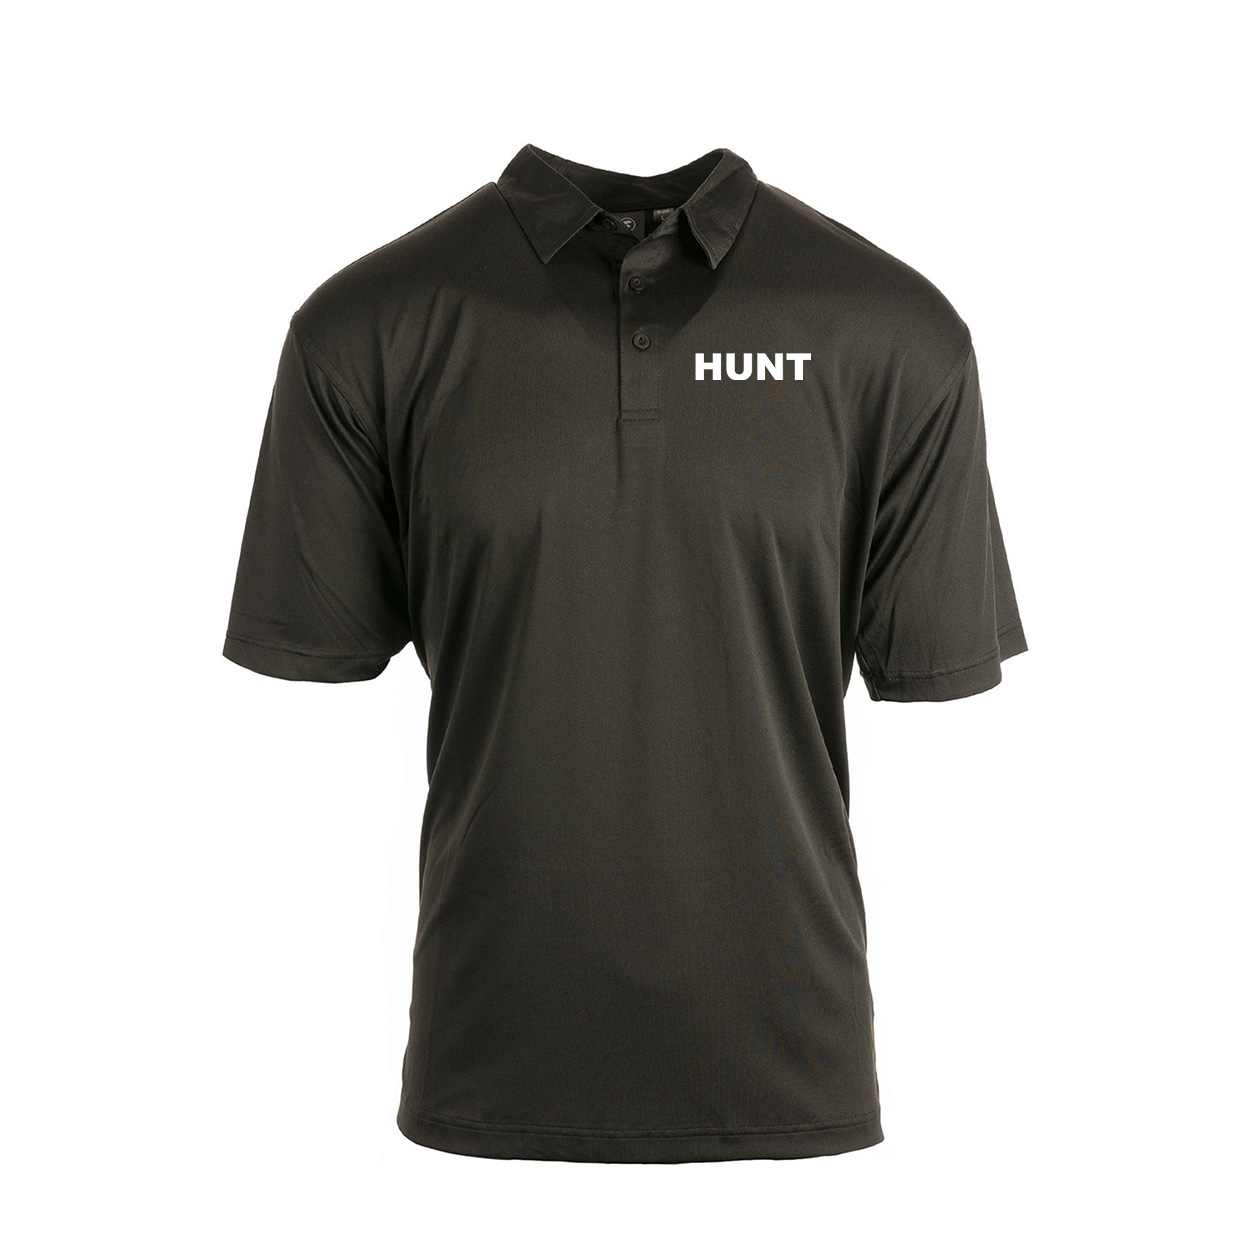 Hunt Brand Logo Night Out Golf Polo Shirt Black Dotted (White Logo)